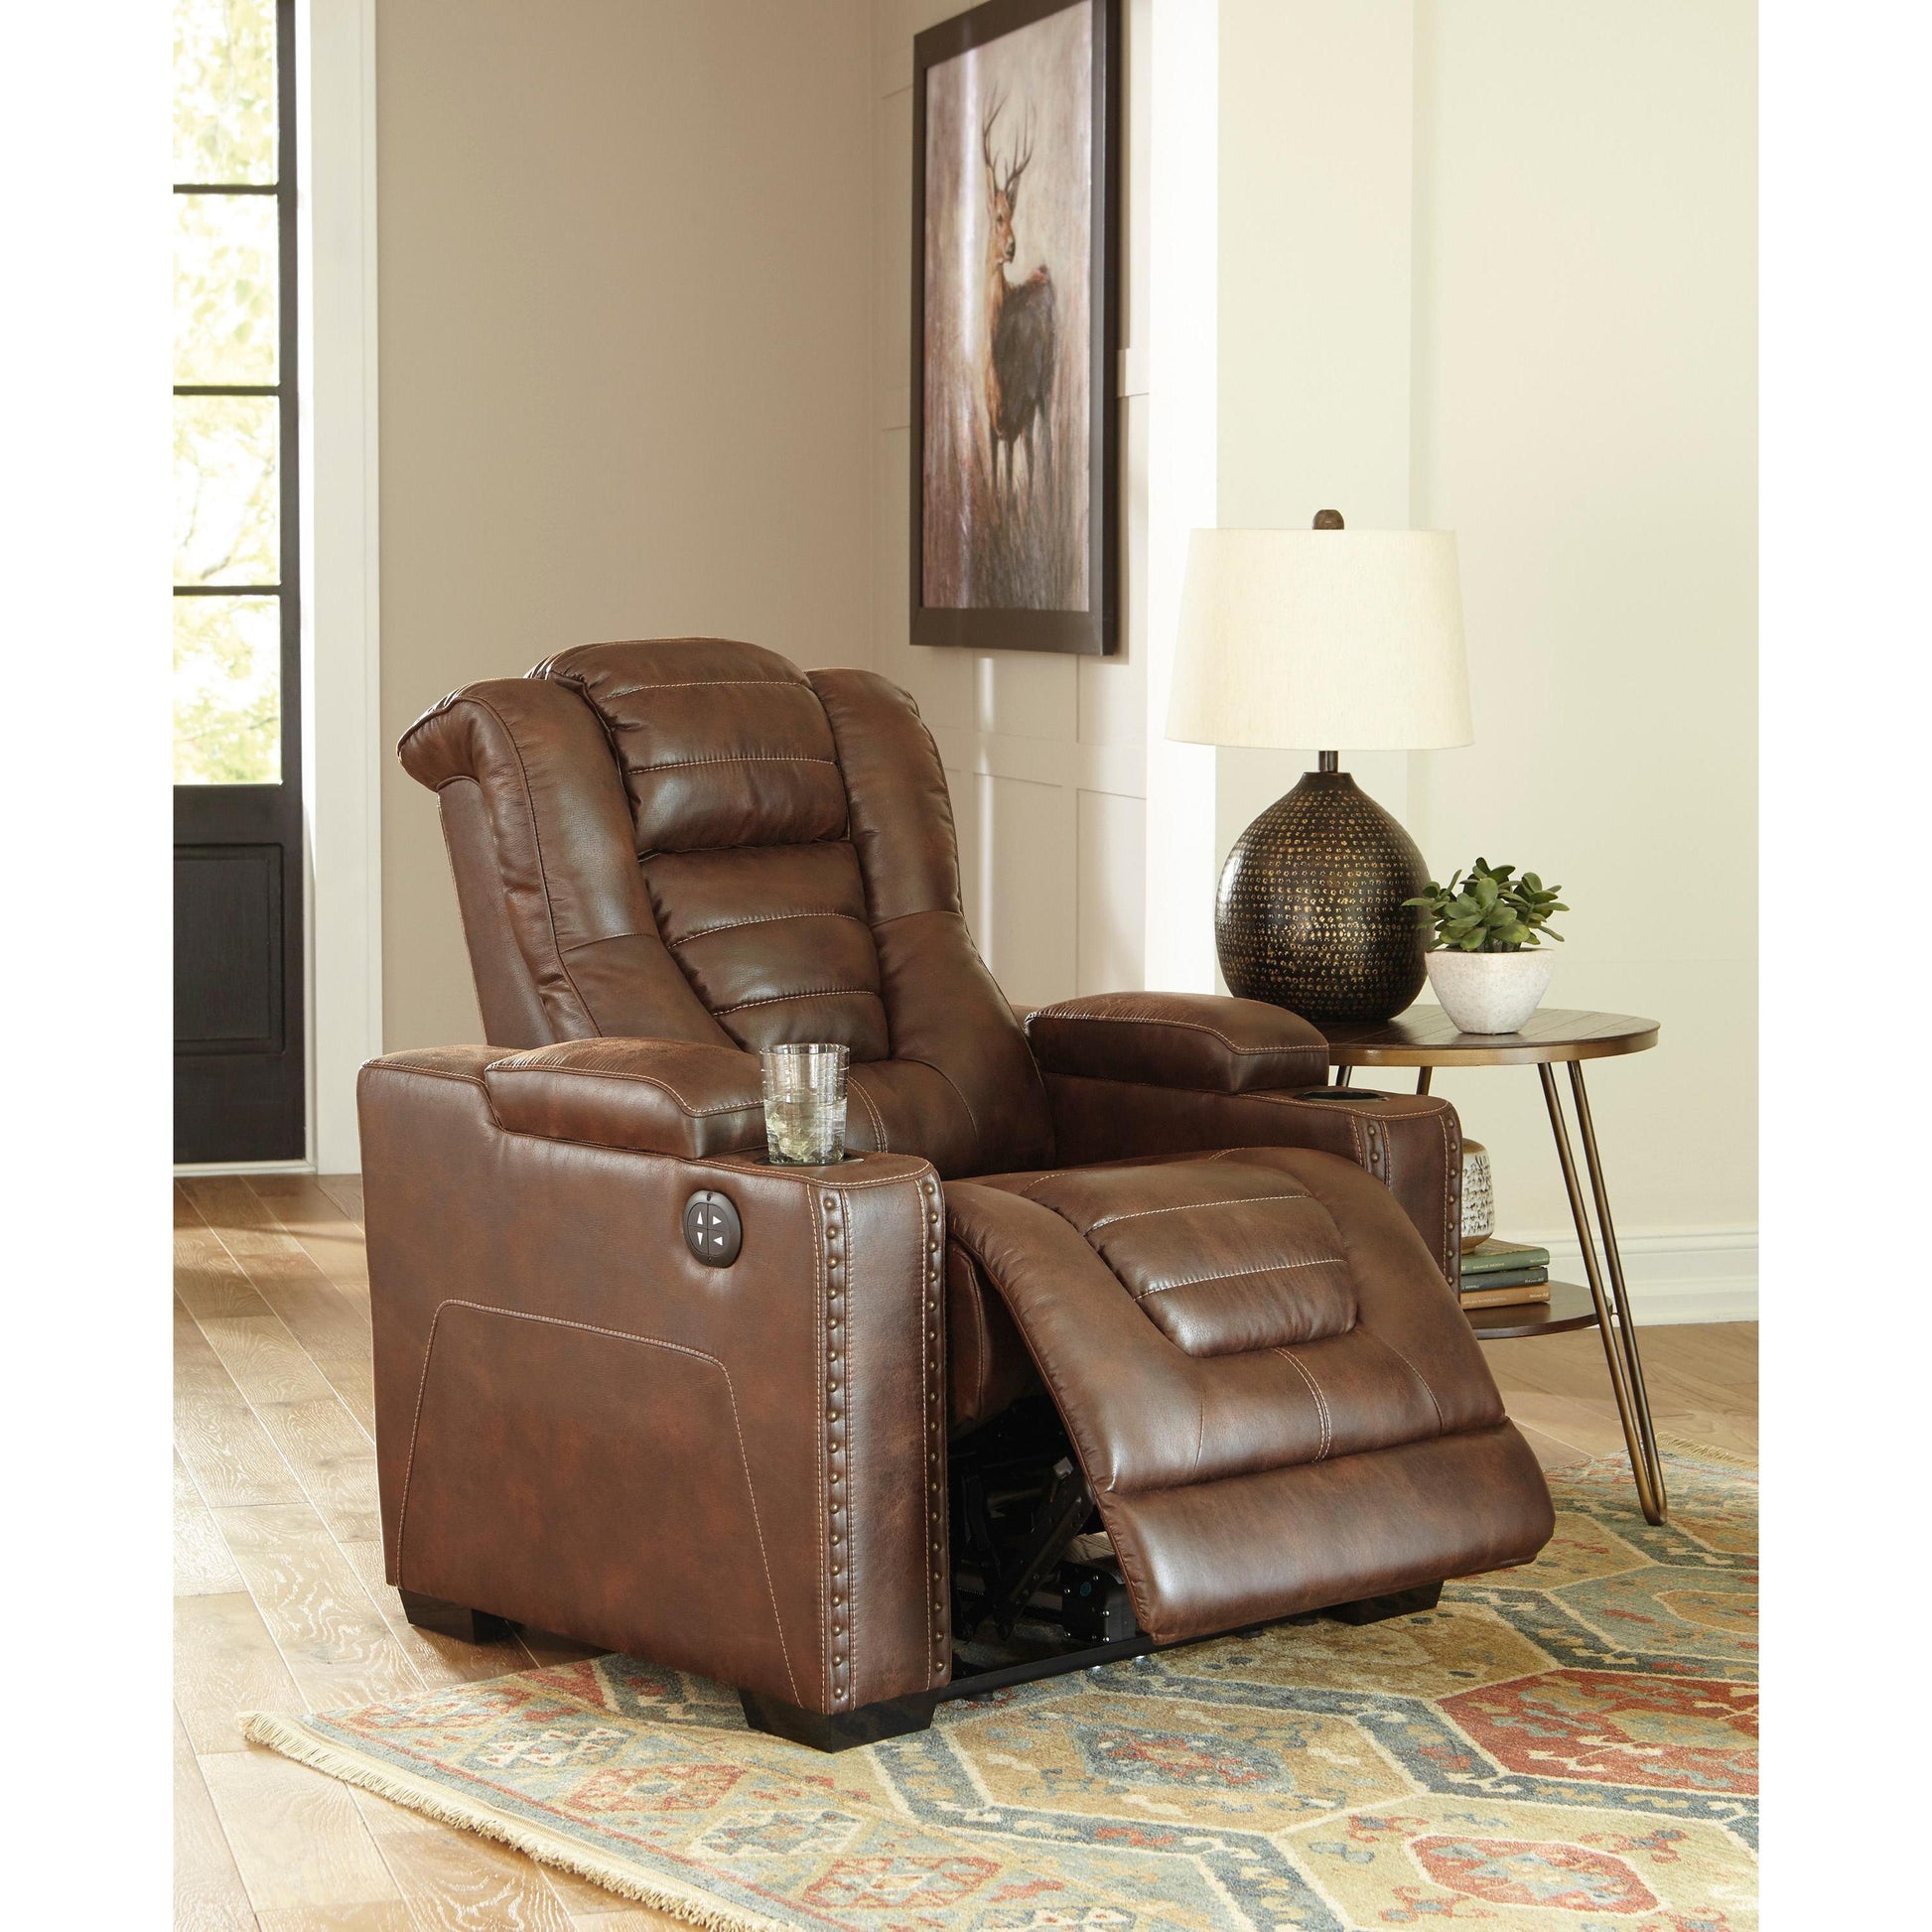 Signature Design by Ashley Owner's Box 24505U3 2 pc Power Reclining Living Room Set IMAGE 3